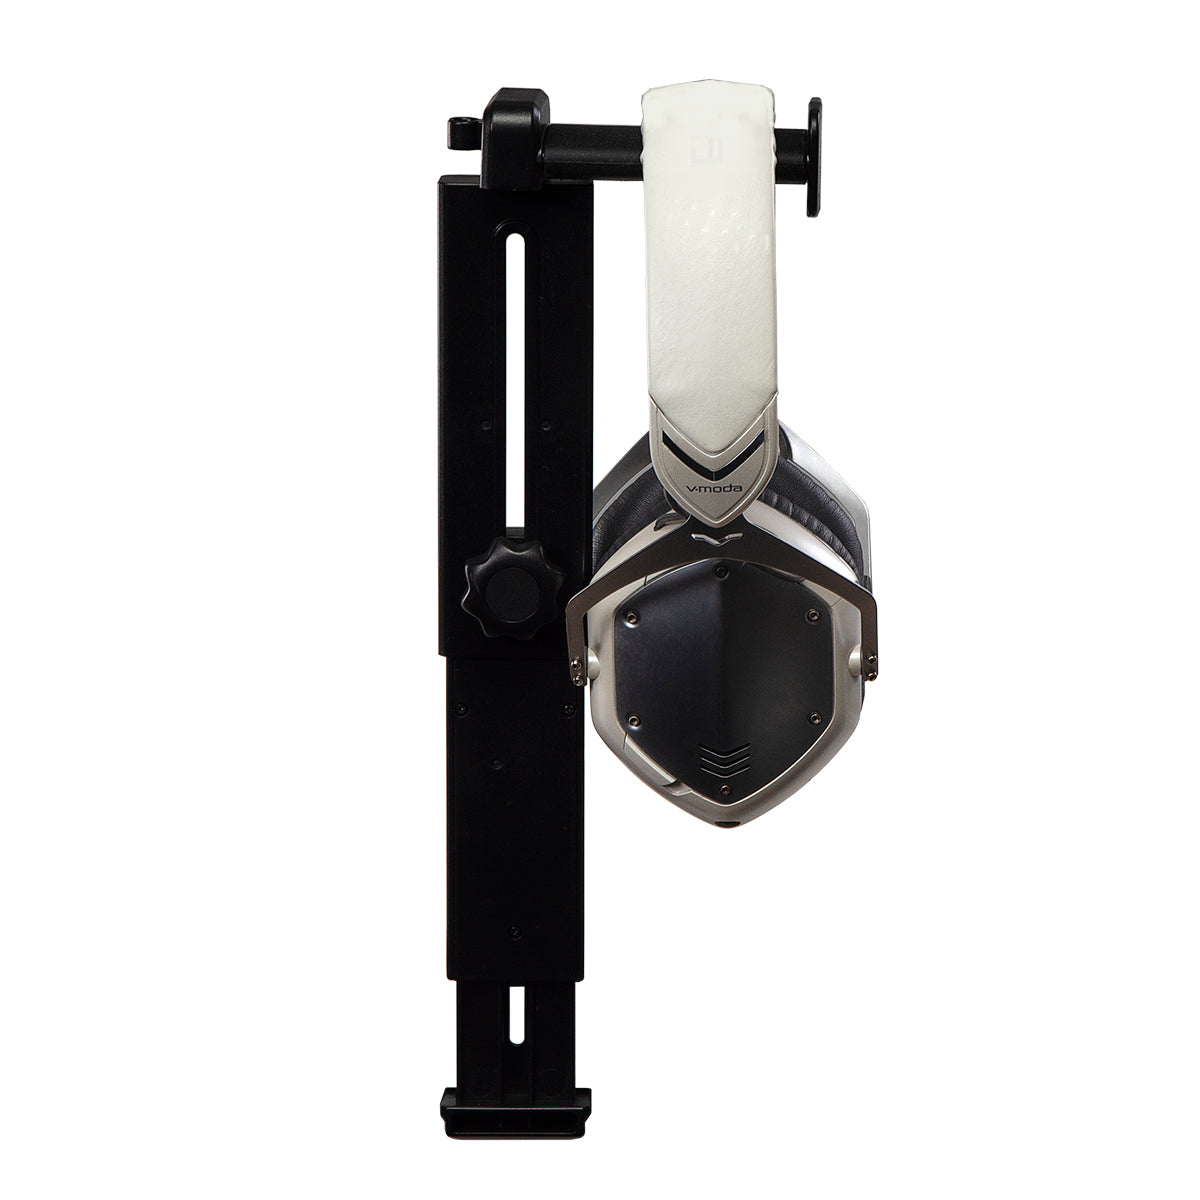 Black plastic desk mounted Headphone stand with white headphones